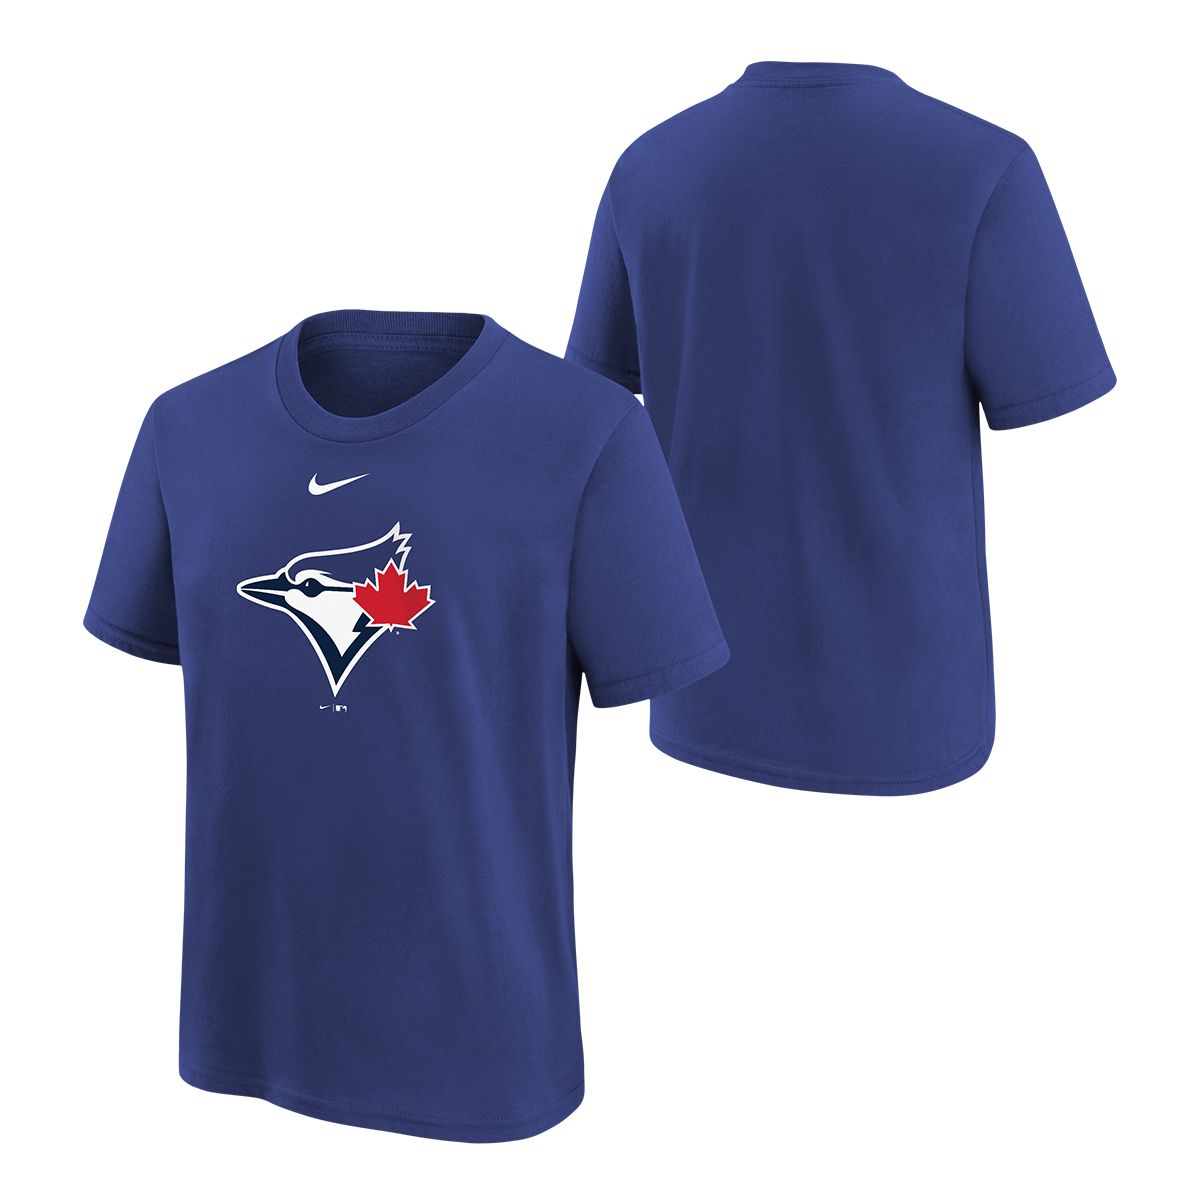 BLUE JAYS COOP CITY COLLECTION HOODIE BLUE